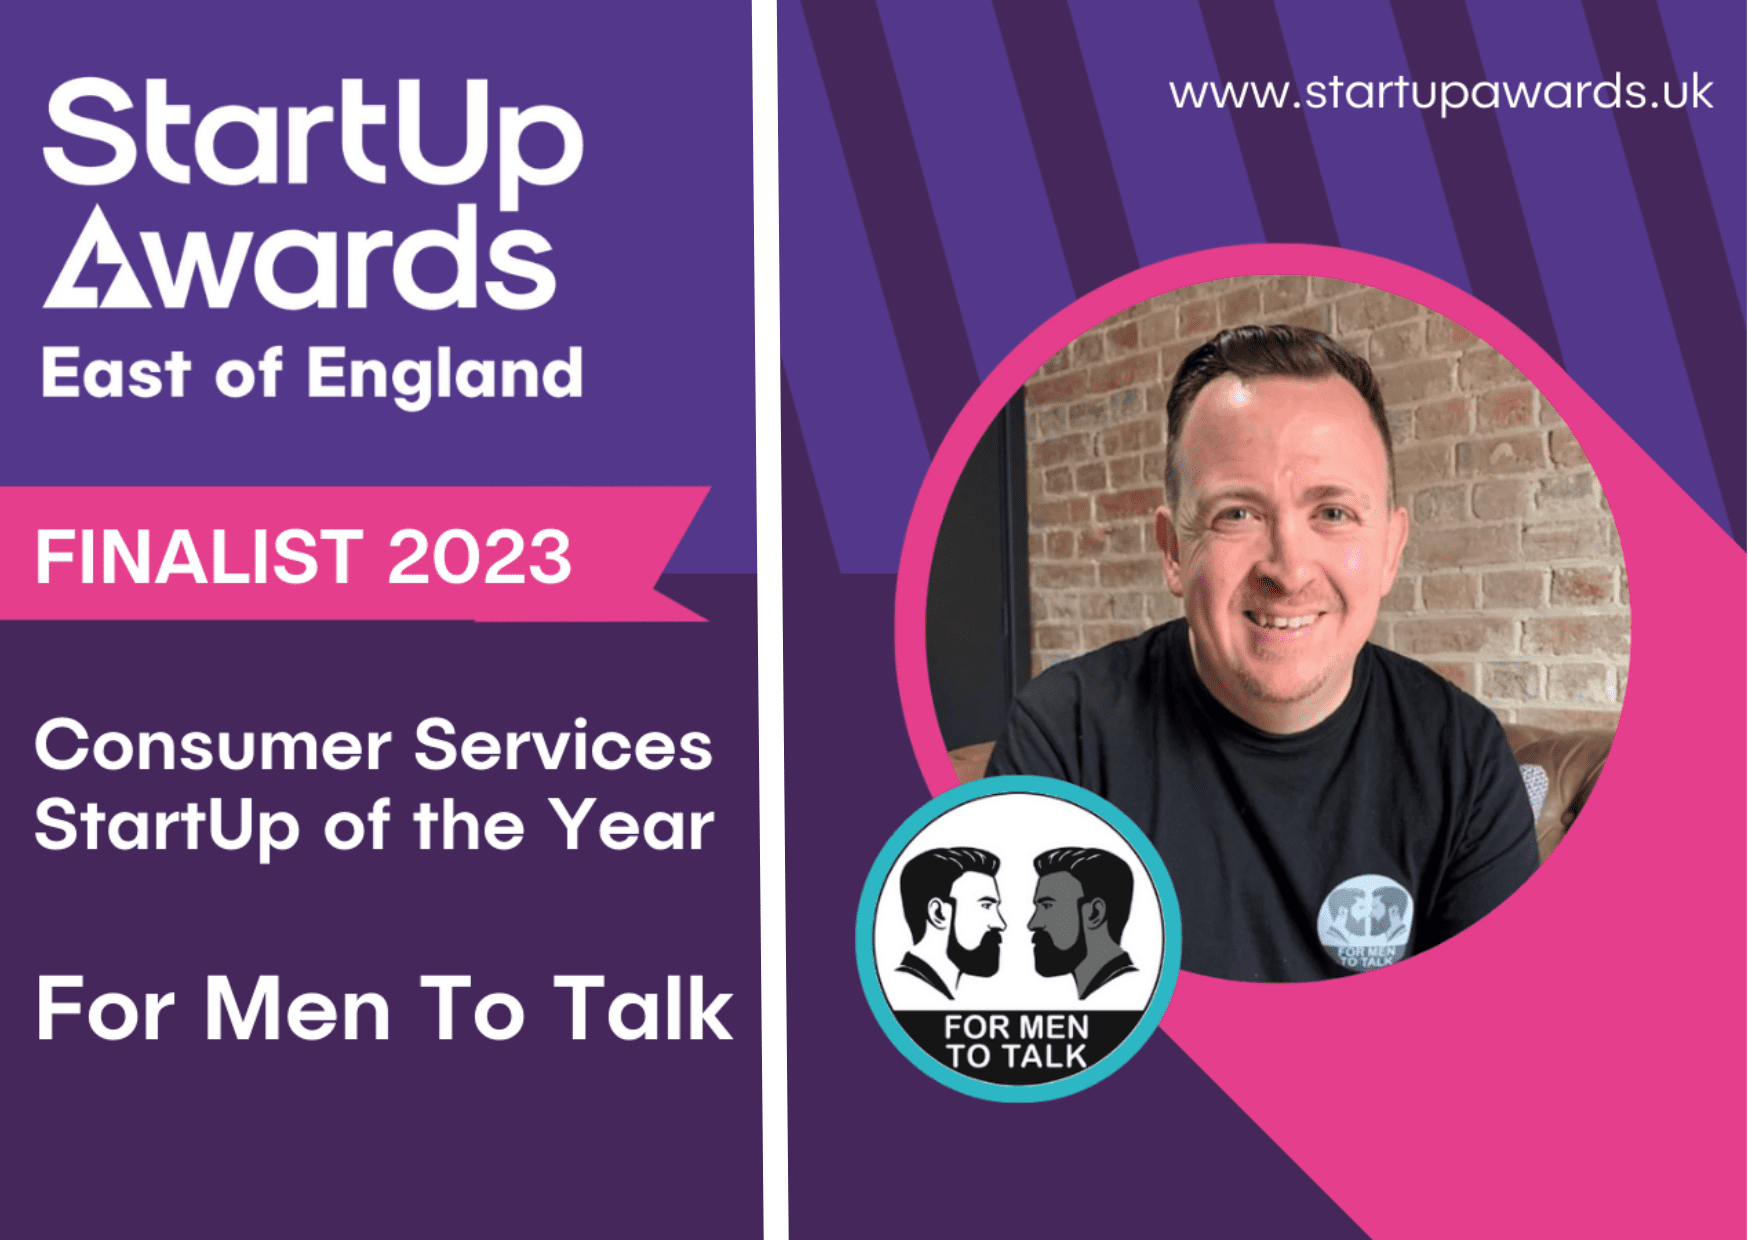 ‘For Men To Talk’ shortlisted at the 2023 Startup Awards